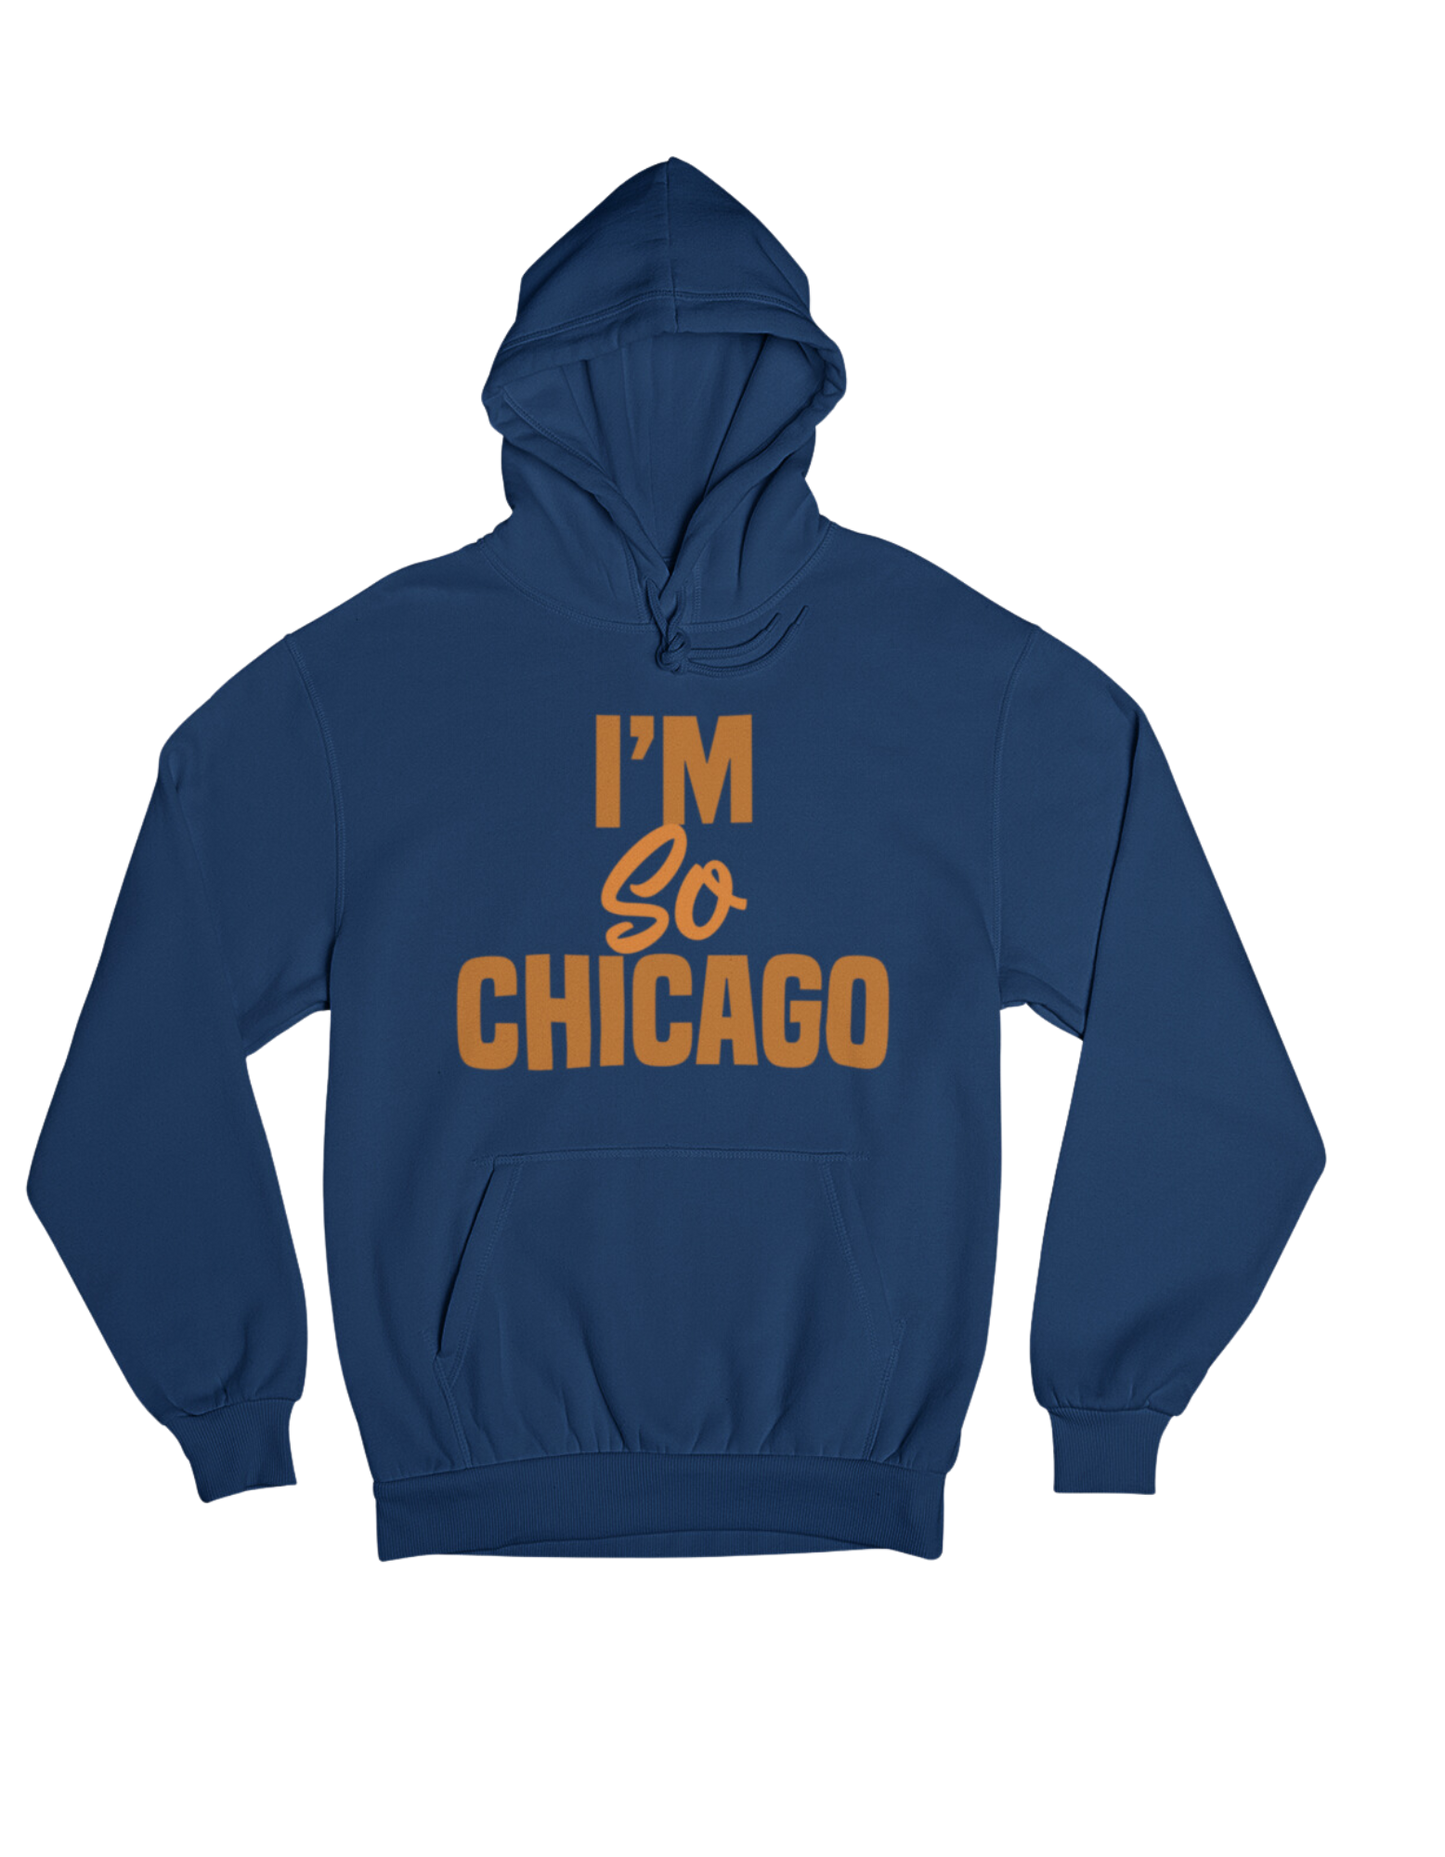 I'm So Chicago Hoodie (Limited Bears Edition)